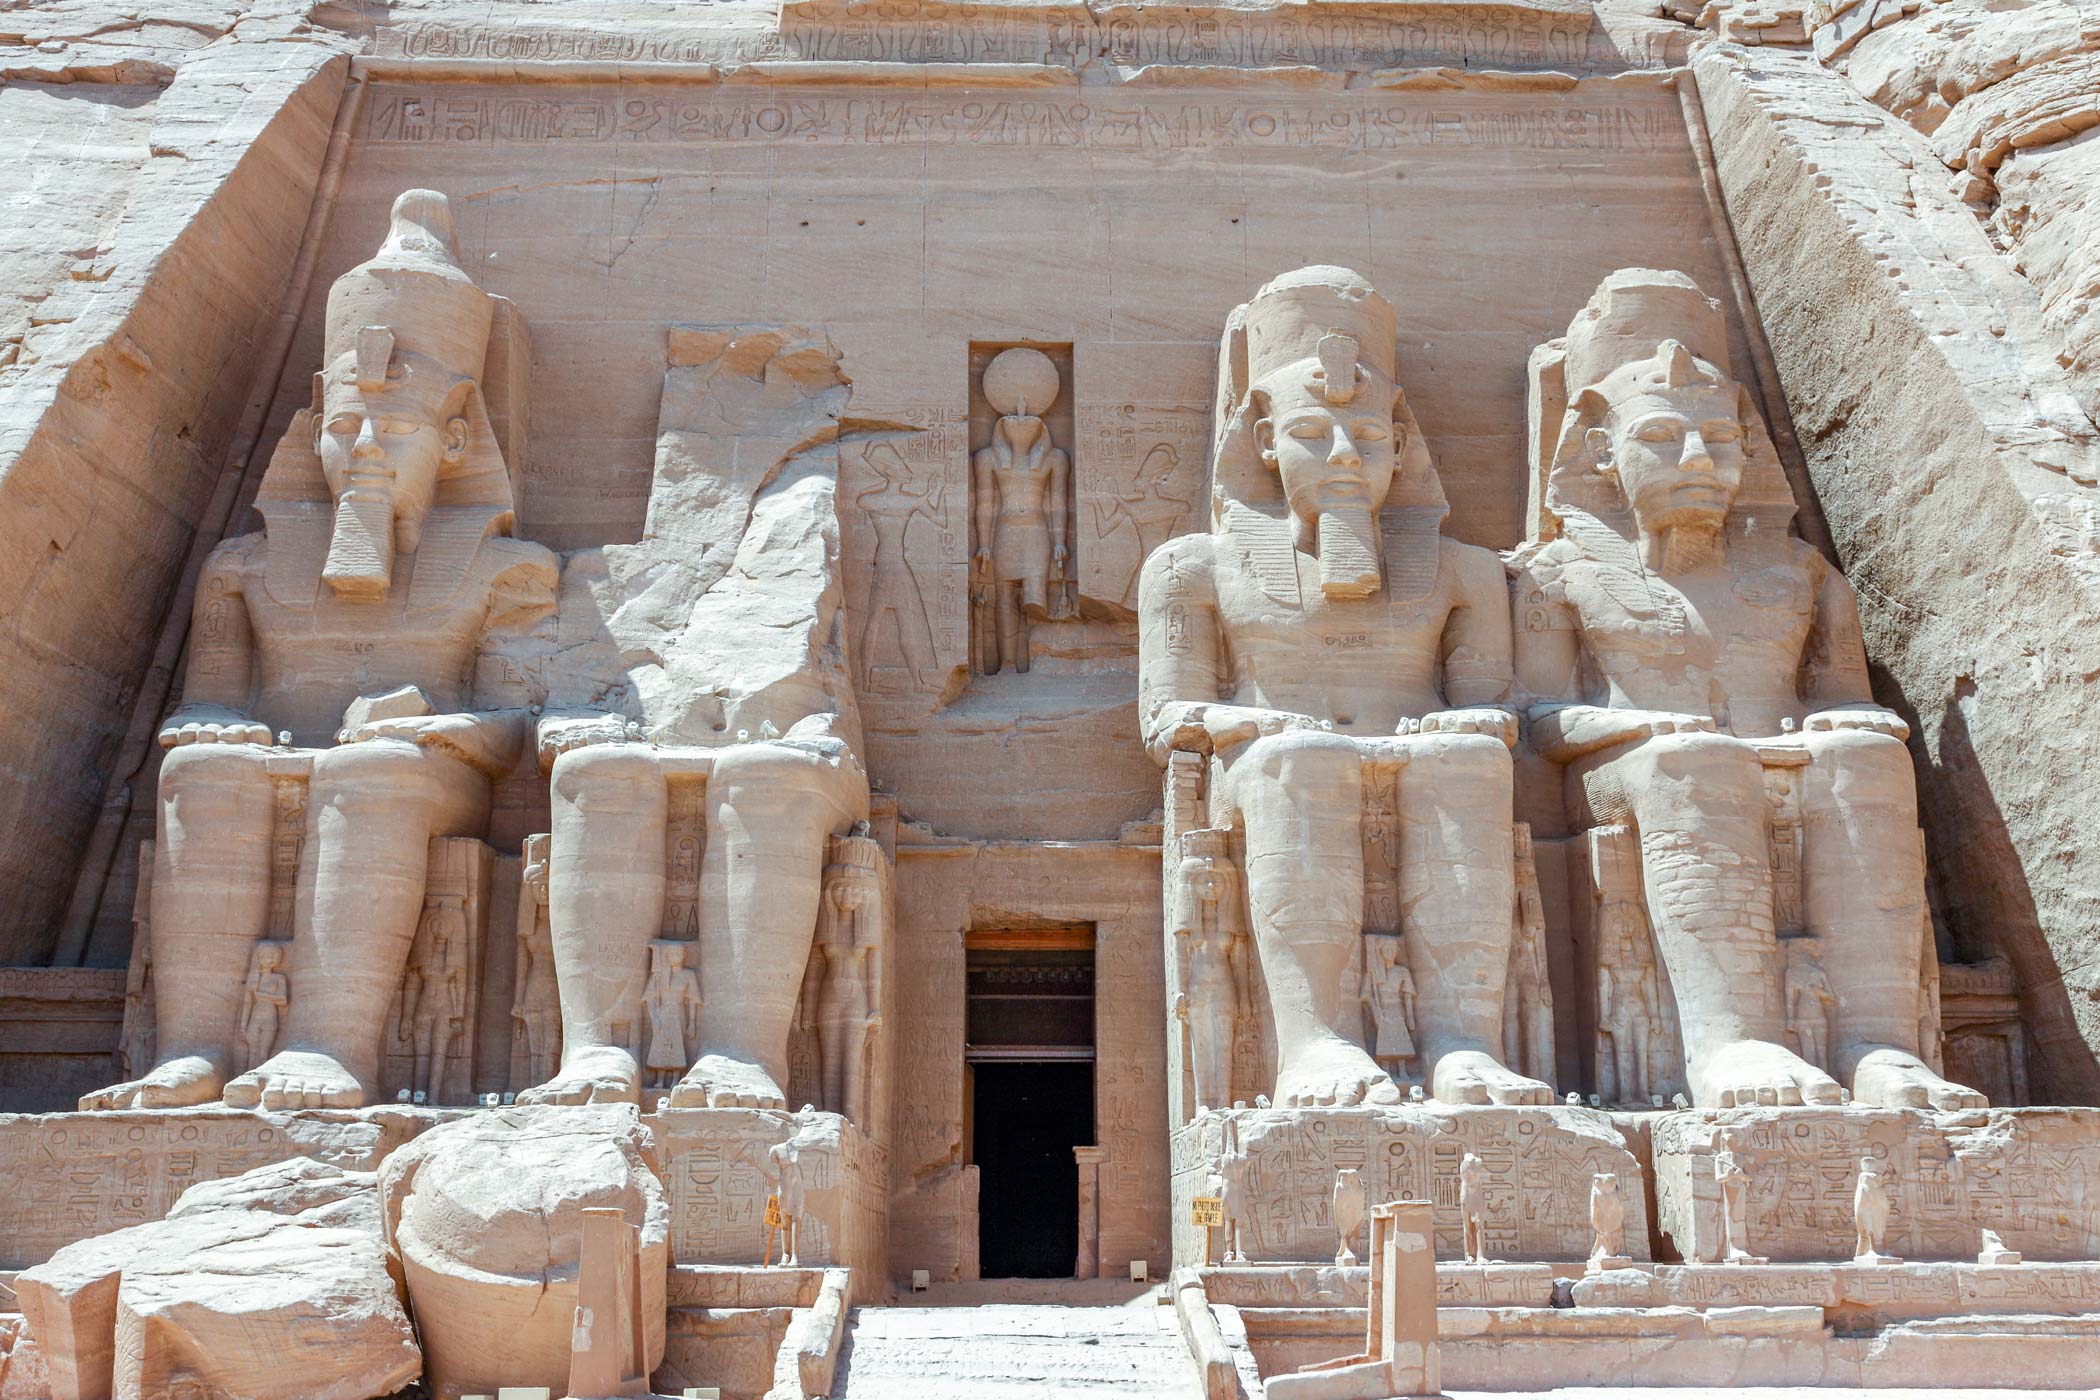 Statues in Egypt